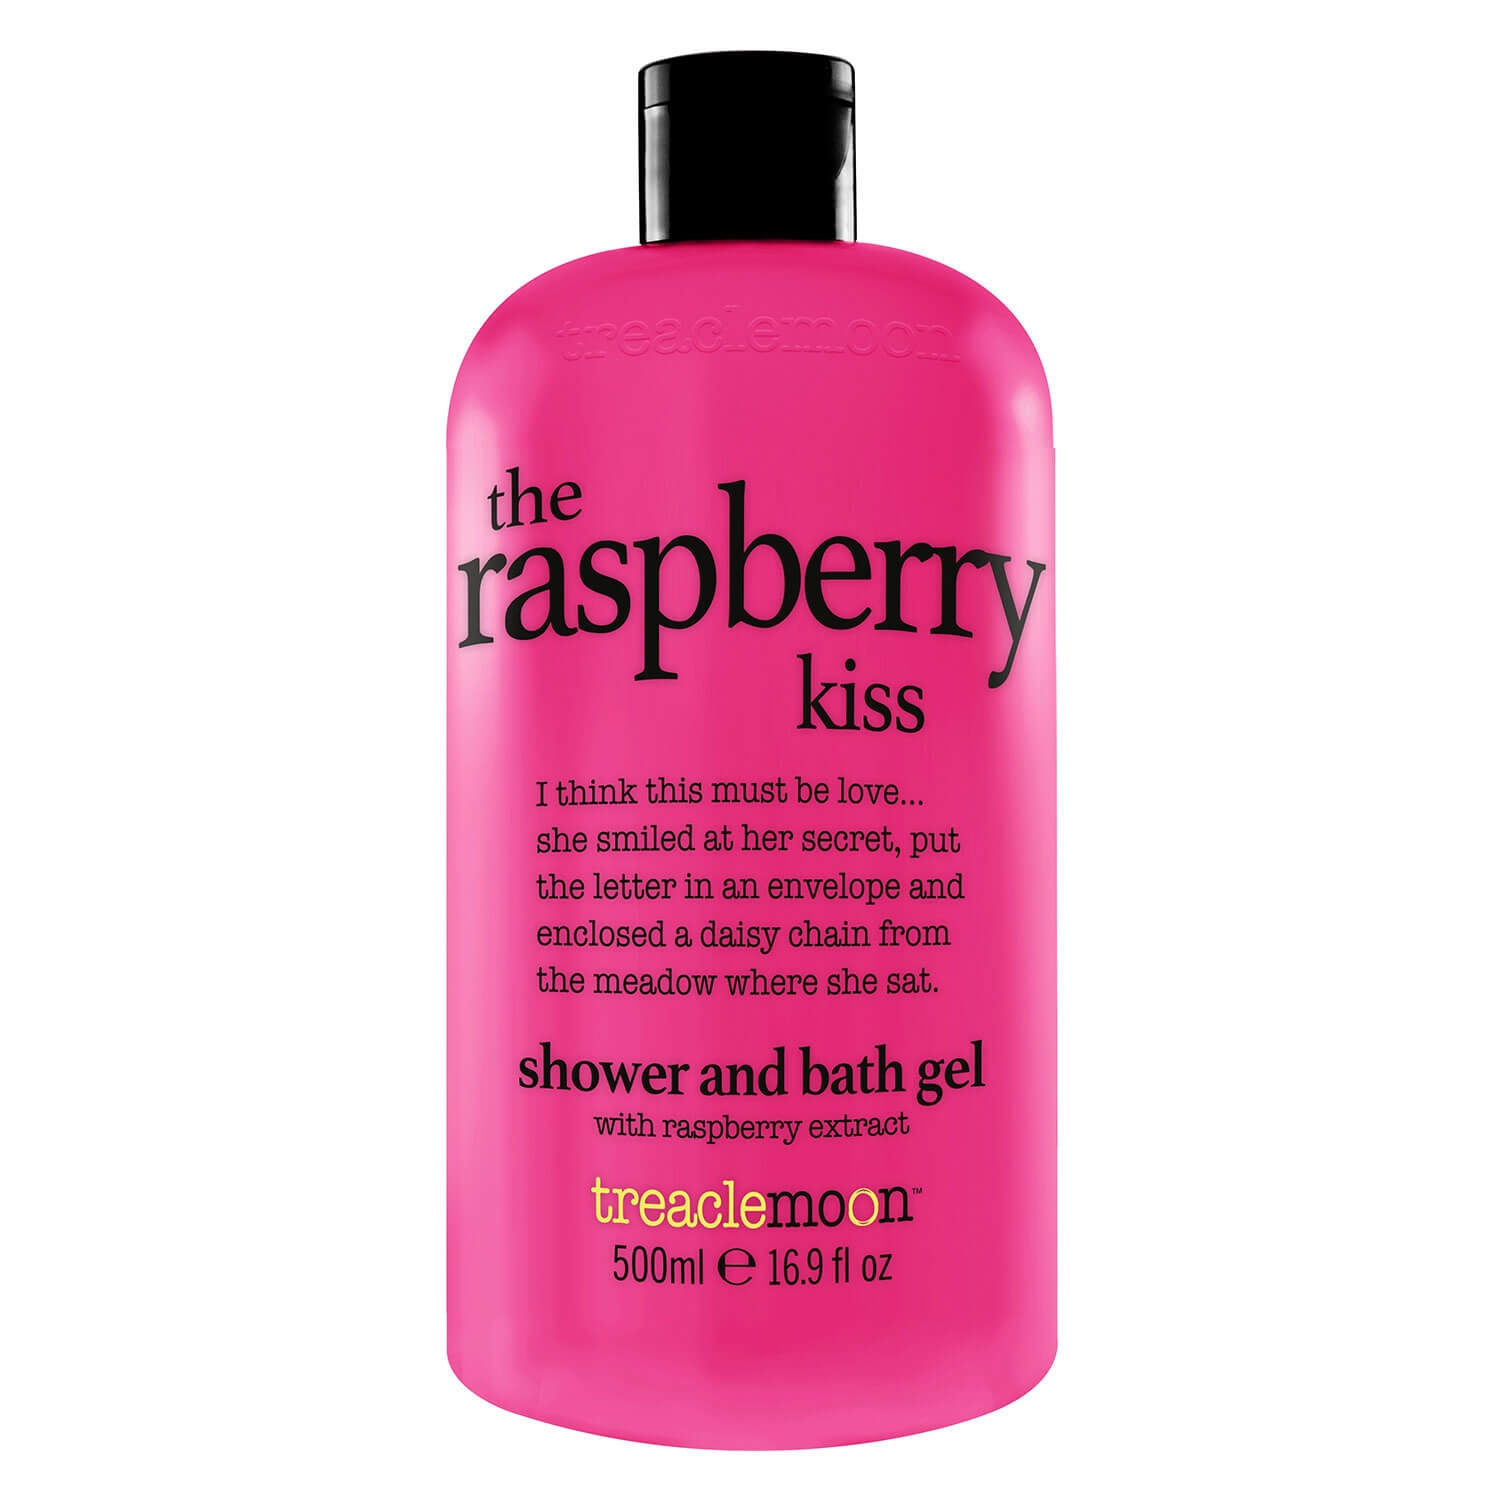 Product image from treaclemoon - the raspberry kiss bath and shower gel